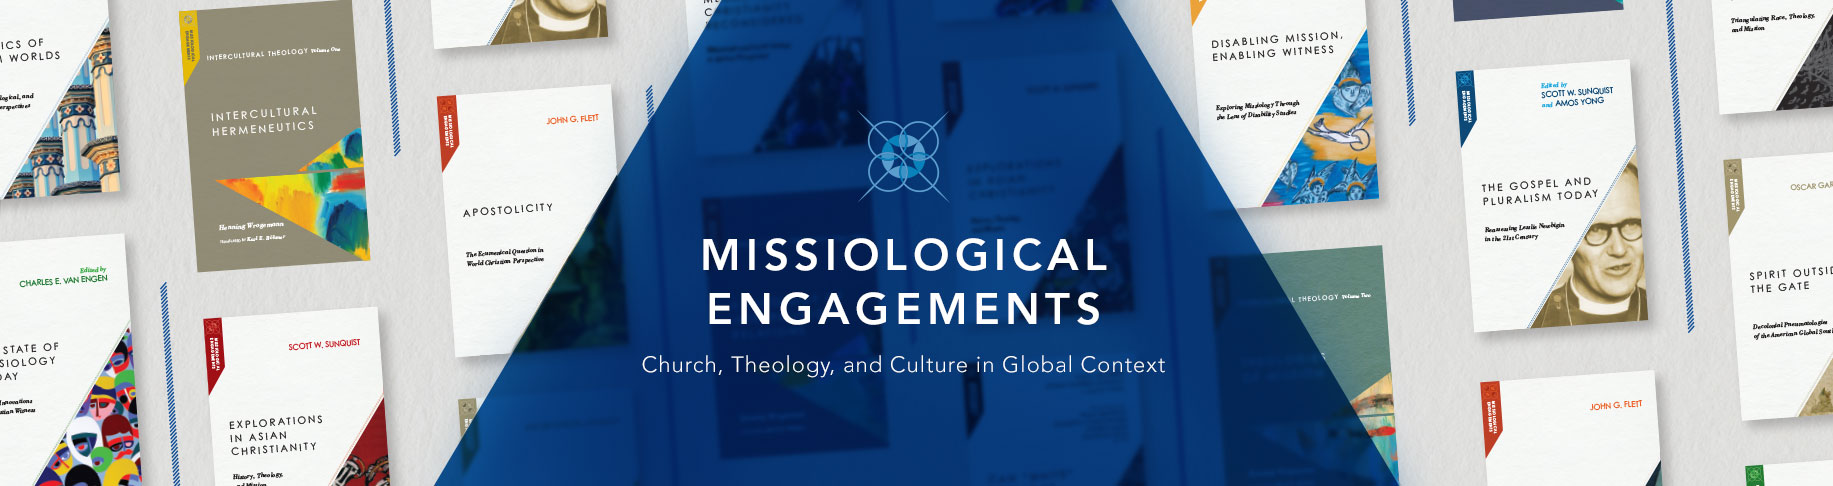 Missiological Engagements